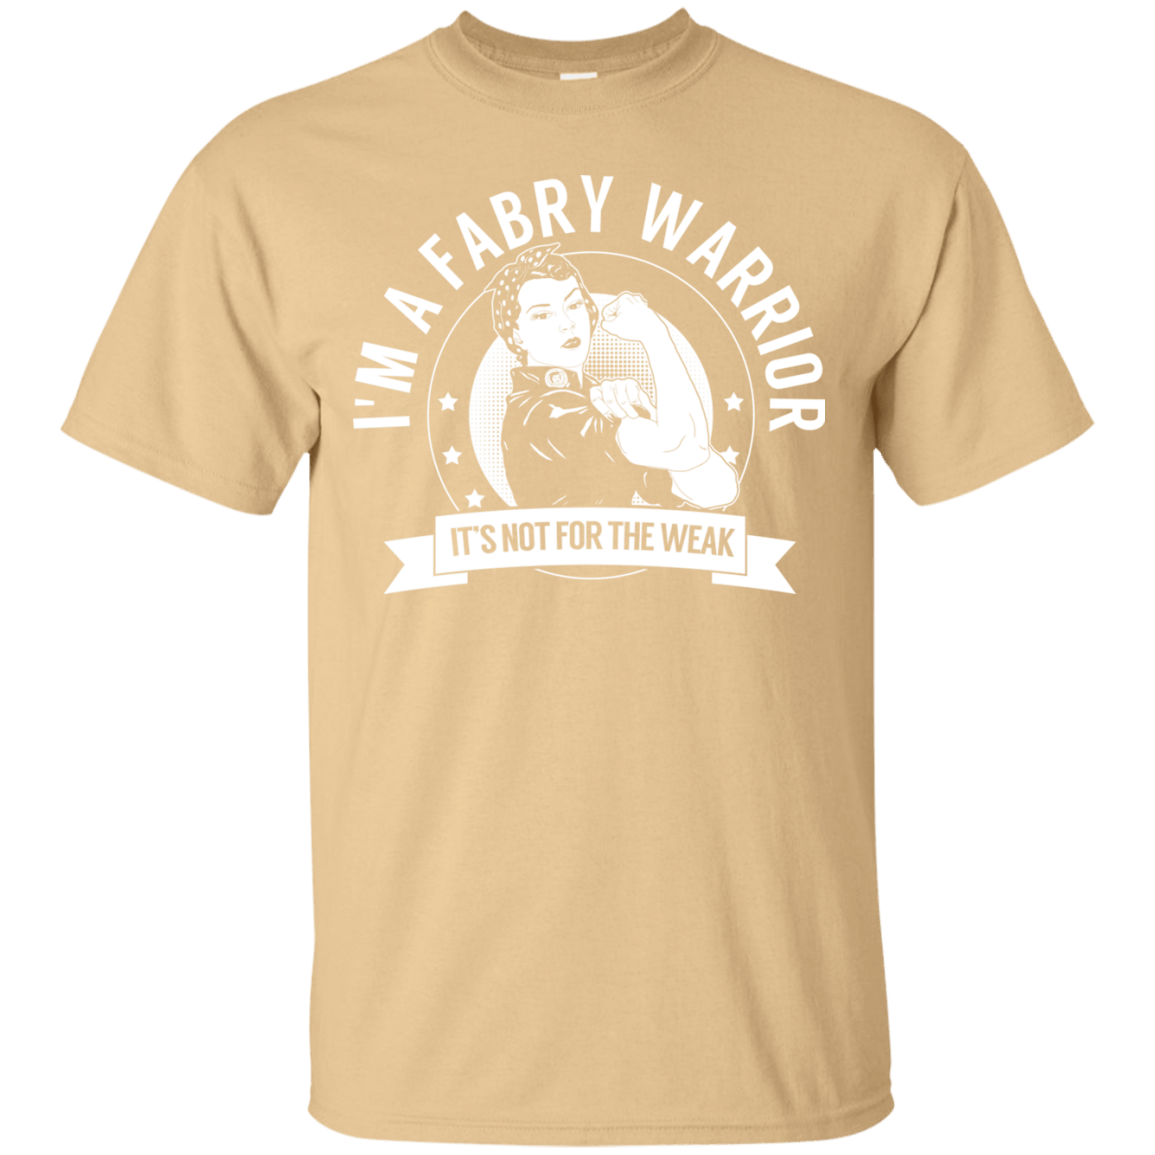 Fabry Warrior Not For The Weak Unisex Shirt - The Unchargeables